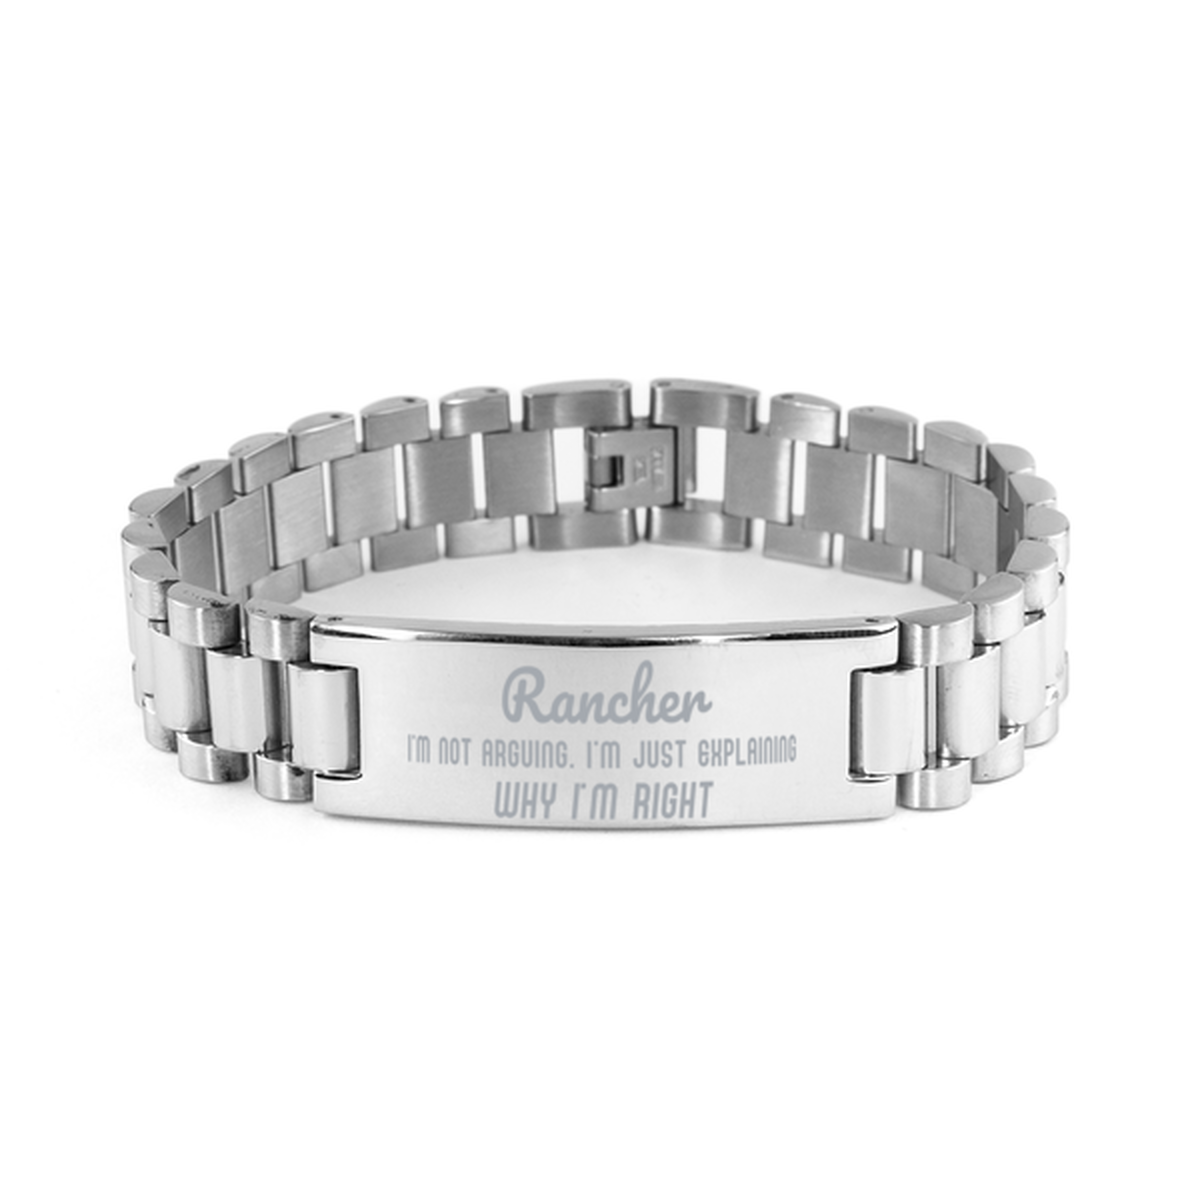 Rancher I'm not Arguing. I'm Just Explaining Why I'm RIGHT Ladder Stainless Steel Bracelet, Graduation Birthday Christmas Rancher Gifts For Rancher Funny Saying Quote Present for Men Women Coworker